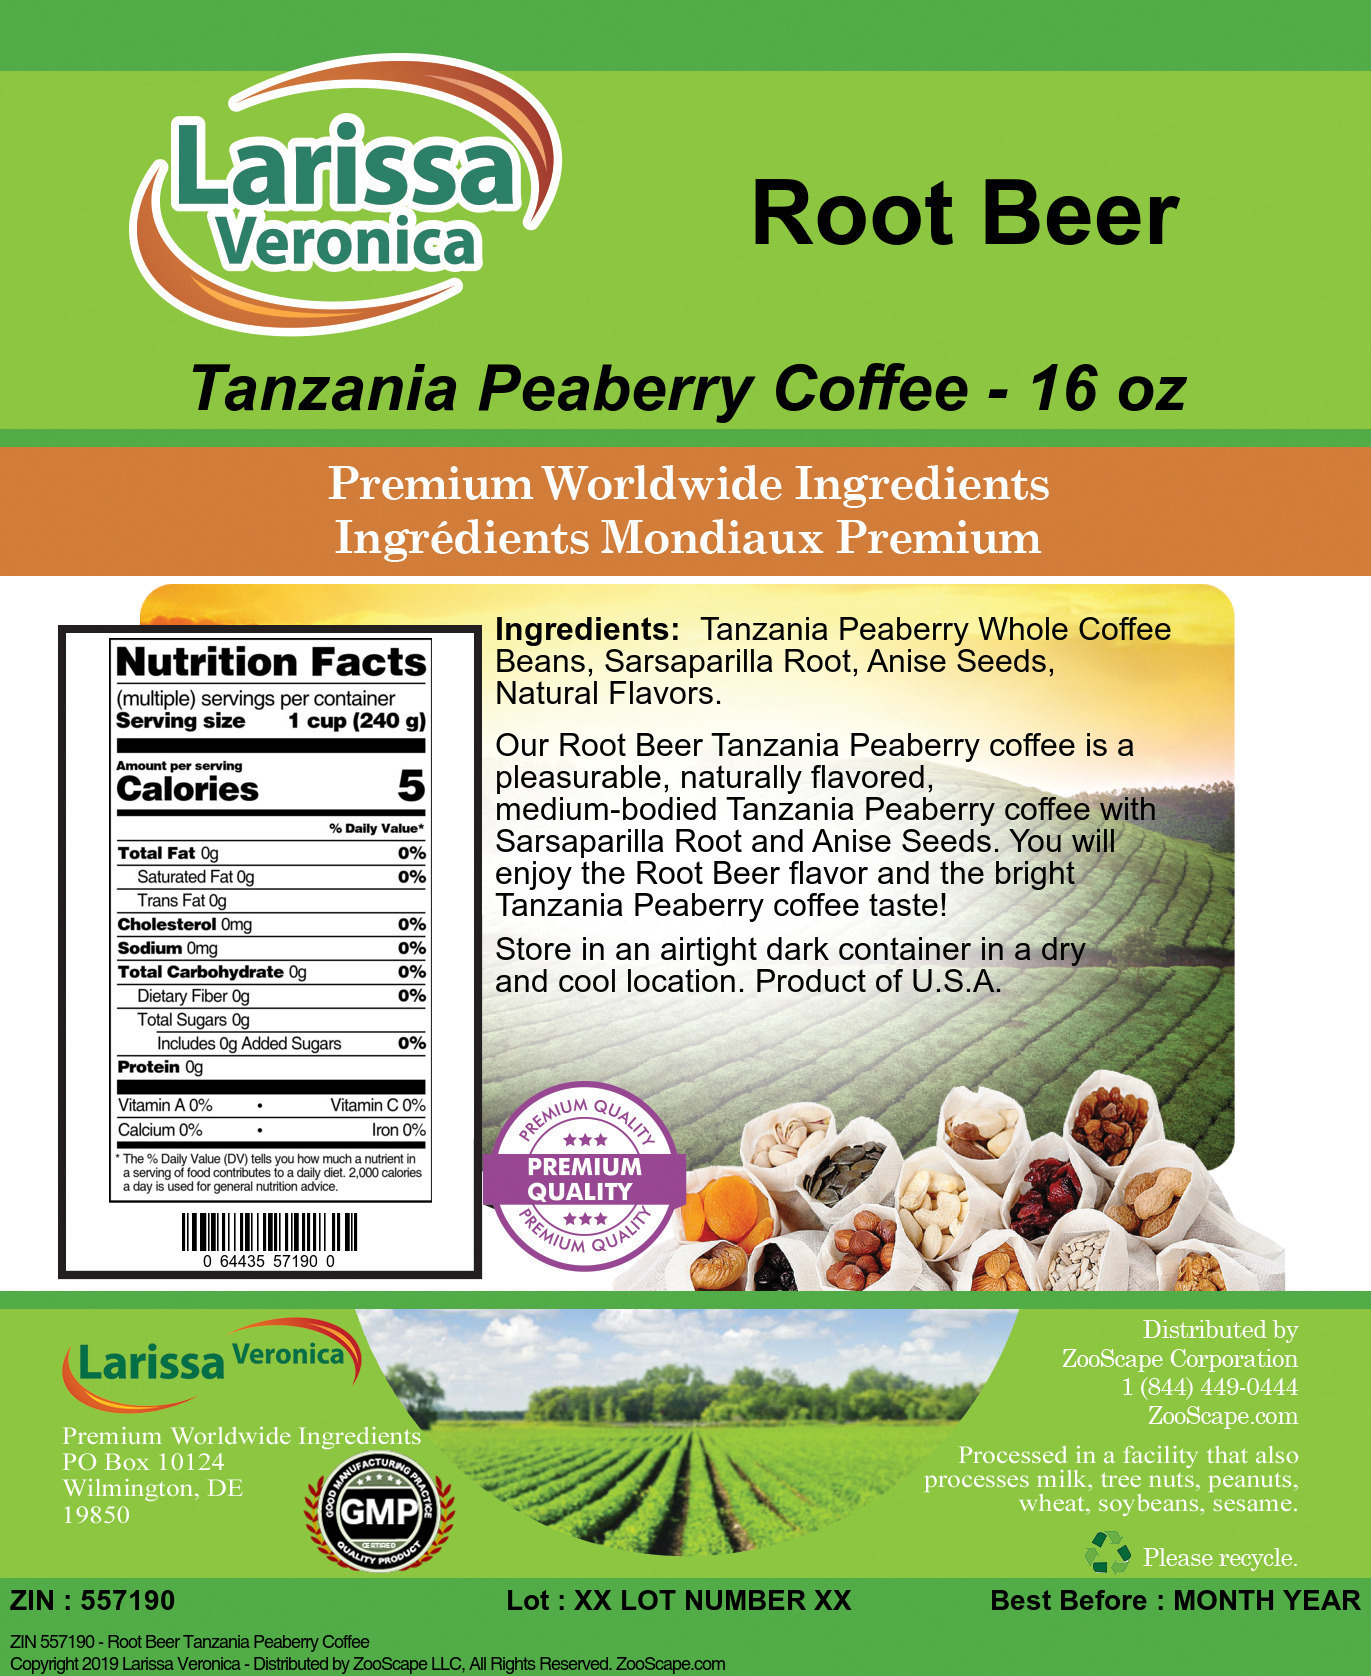 Root Beer Tanzania Peaberry Coffee - Label